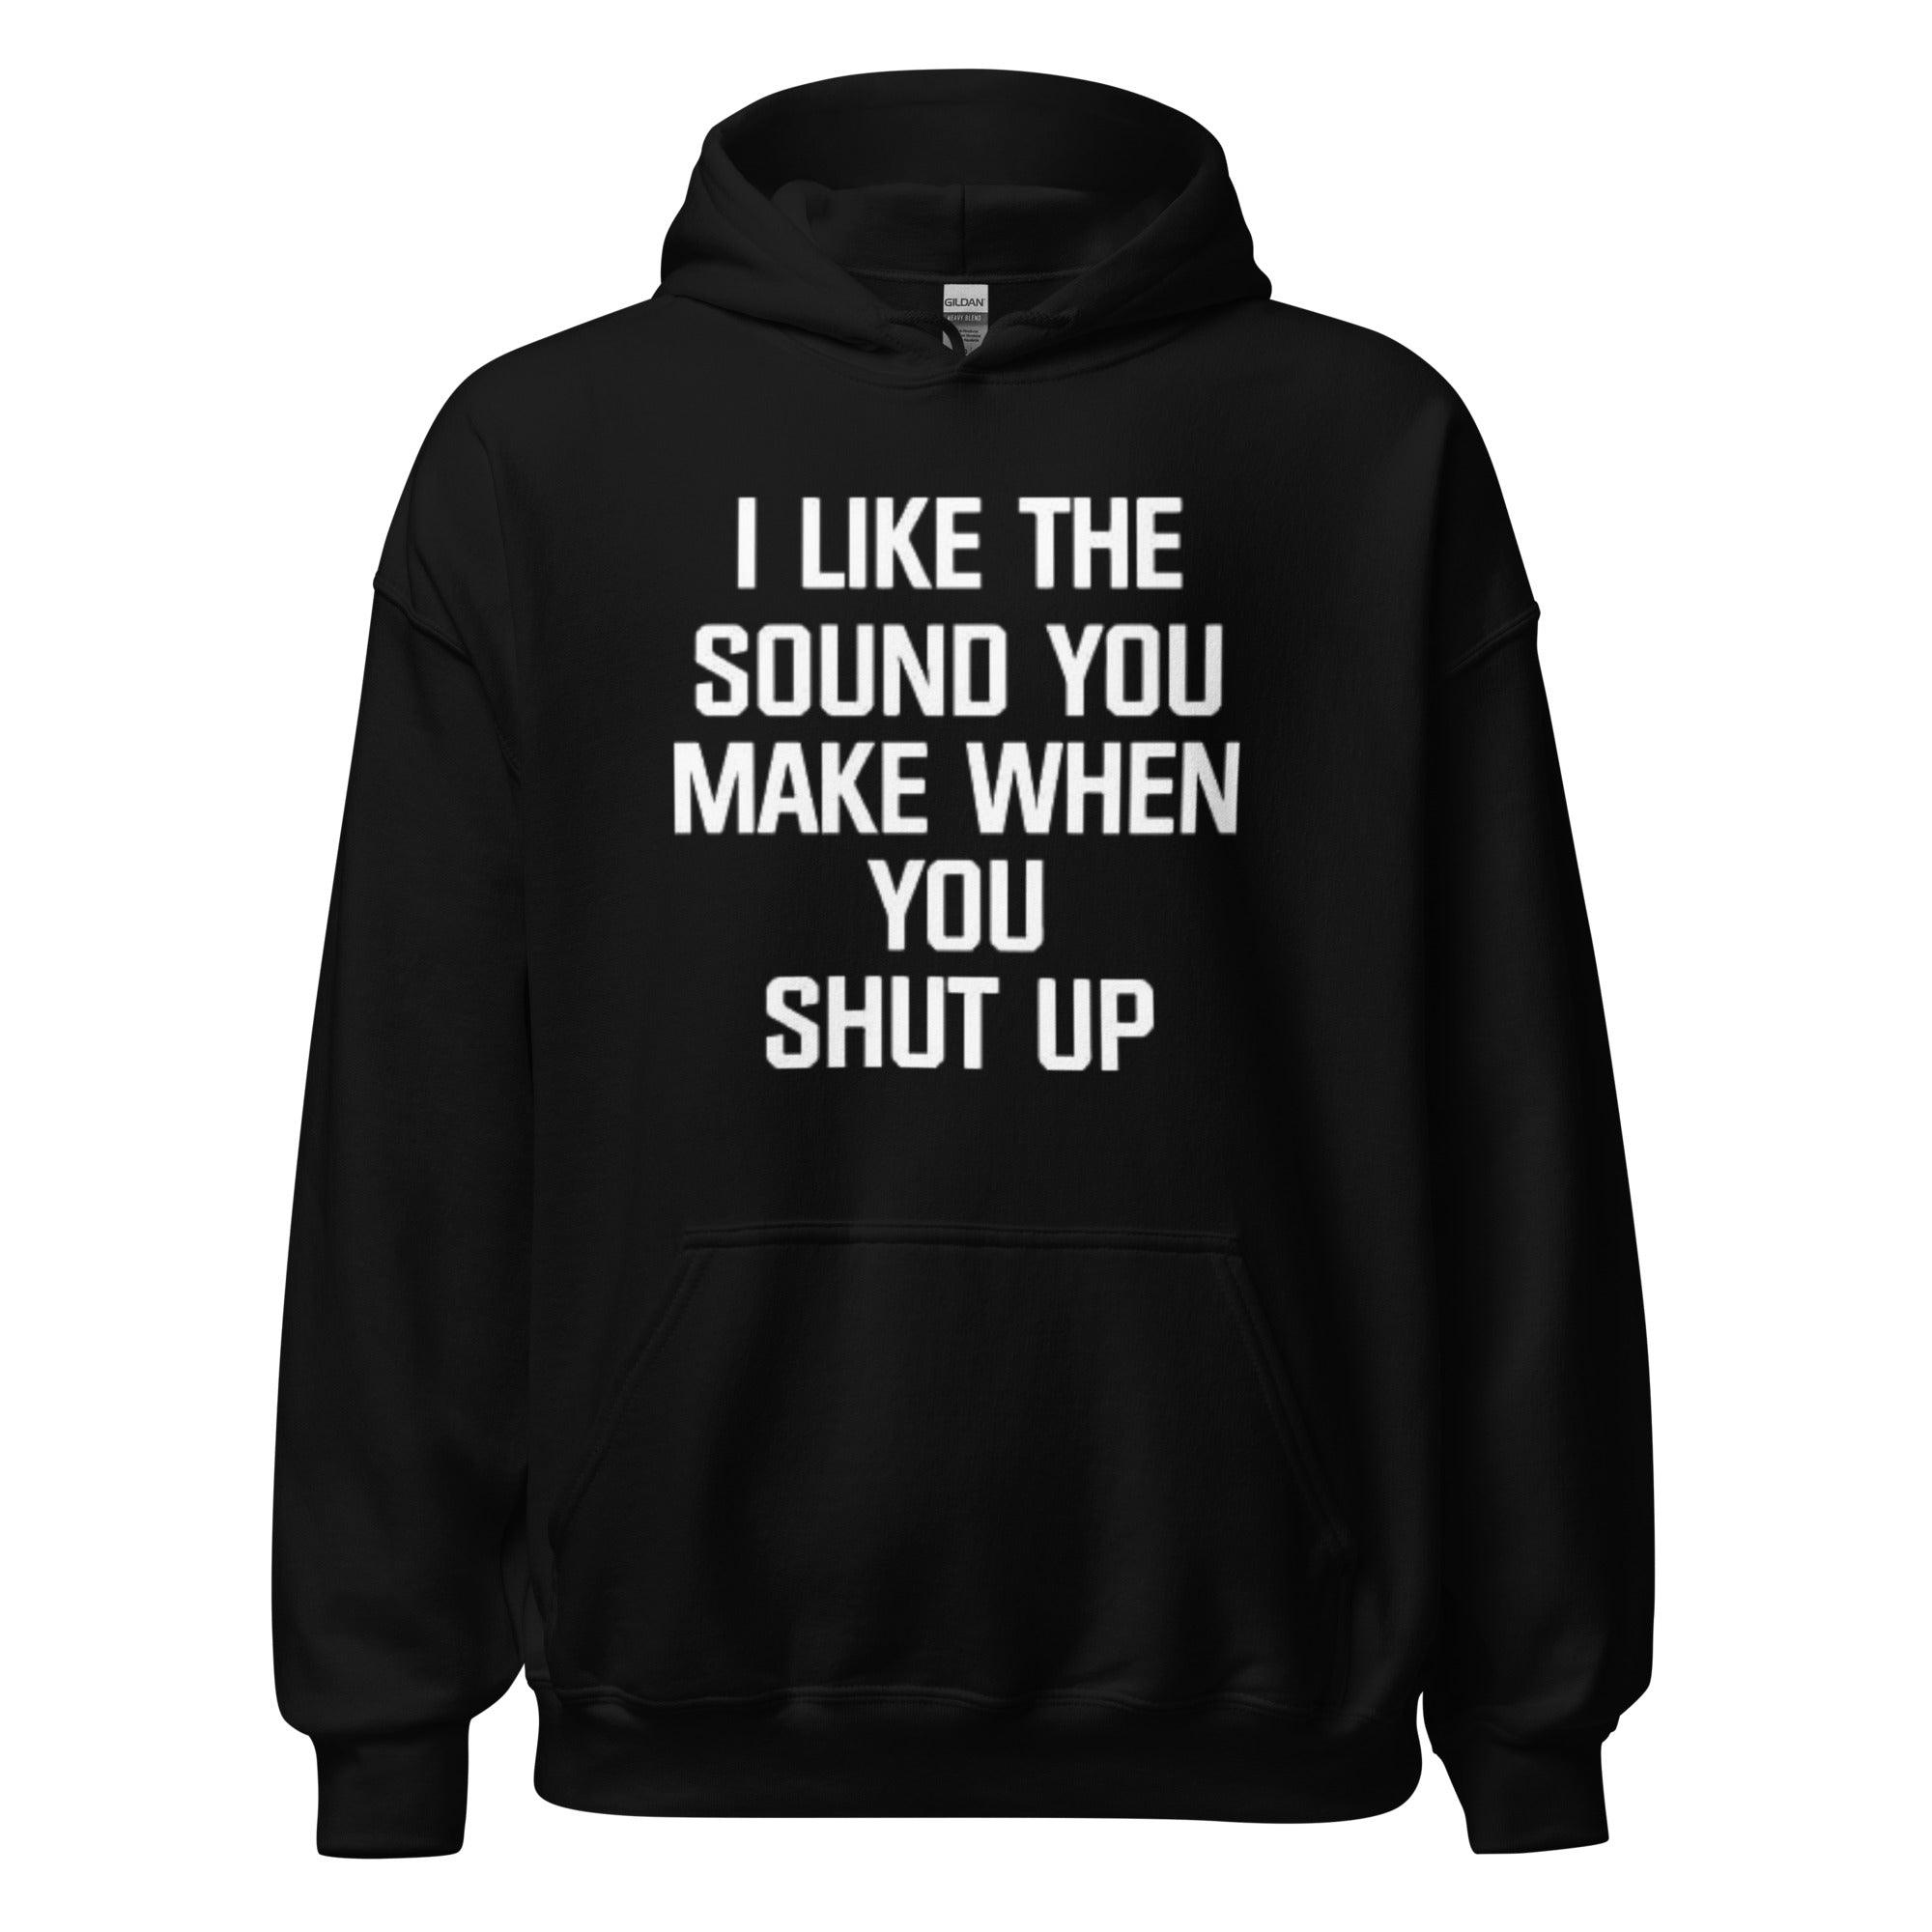 Humor Hoodie I Like The Sound You Make When You Shut Up Midweight Unisex Pullover - TopKoalaTee